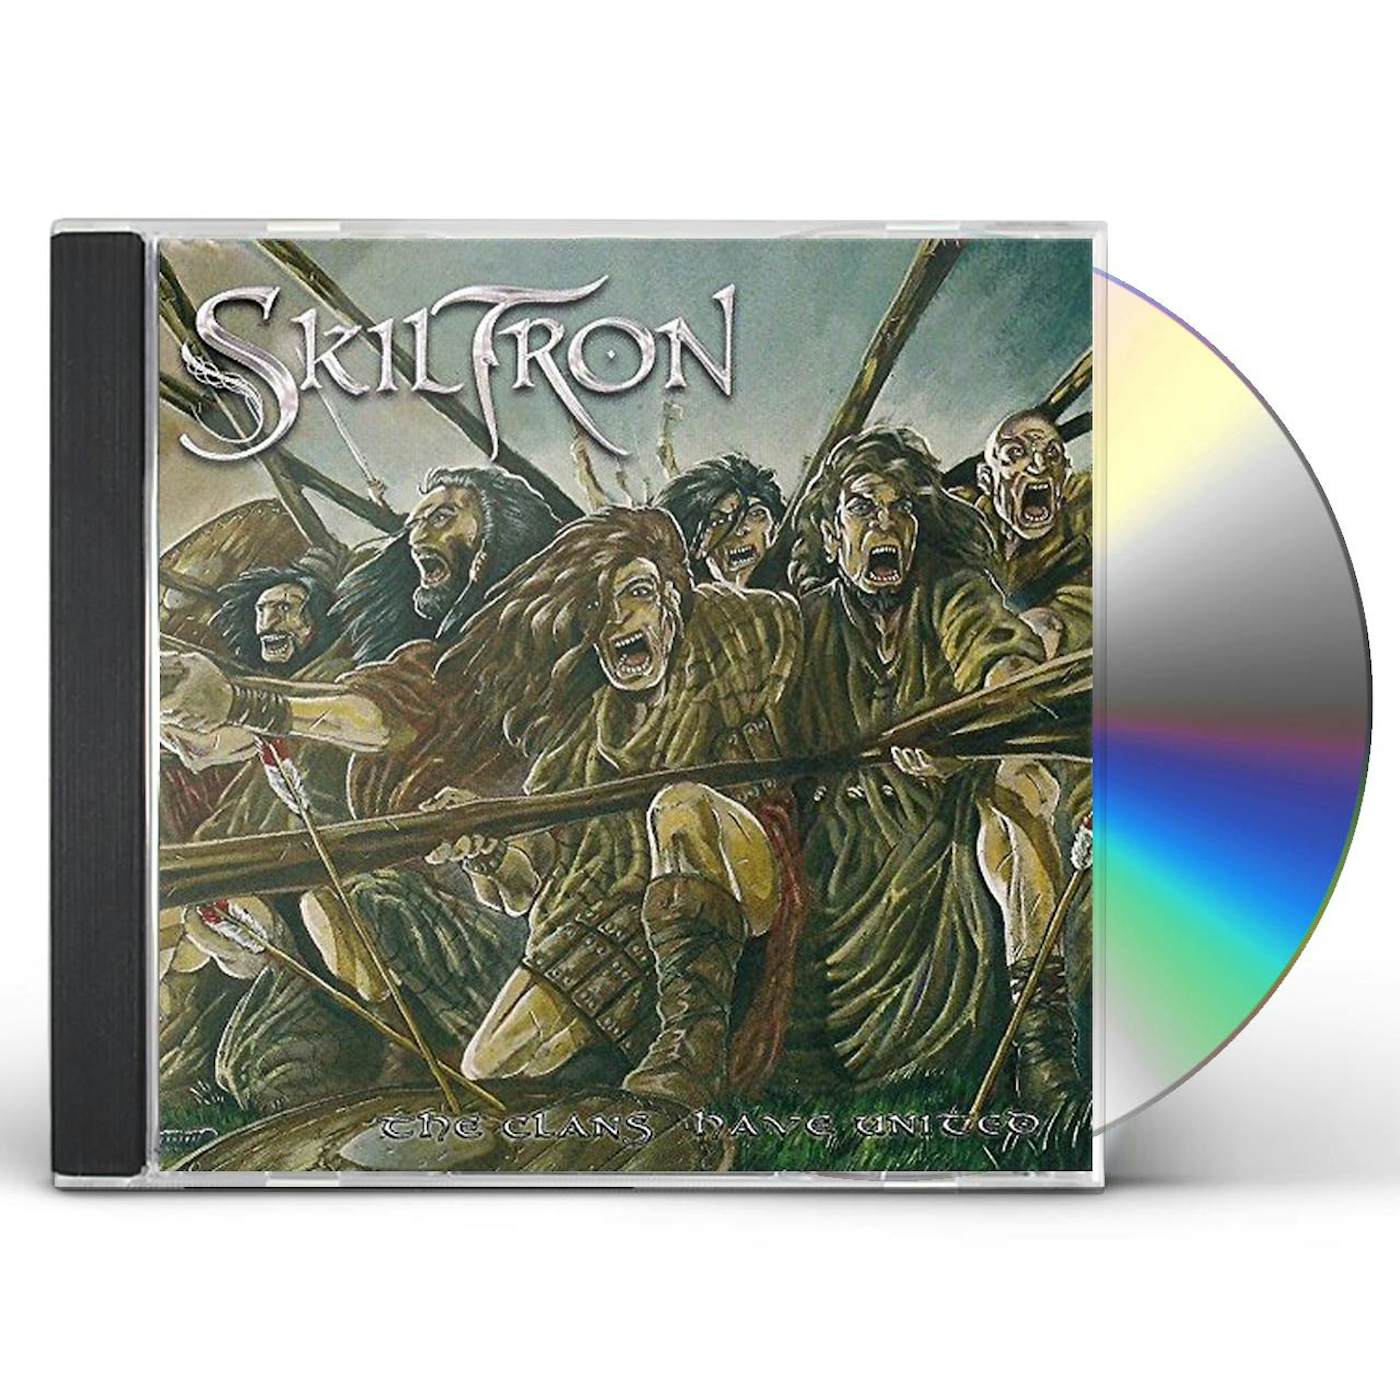 Skiltron CLANS HAVE UNITED CD